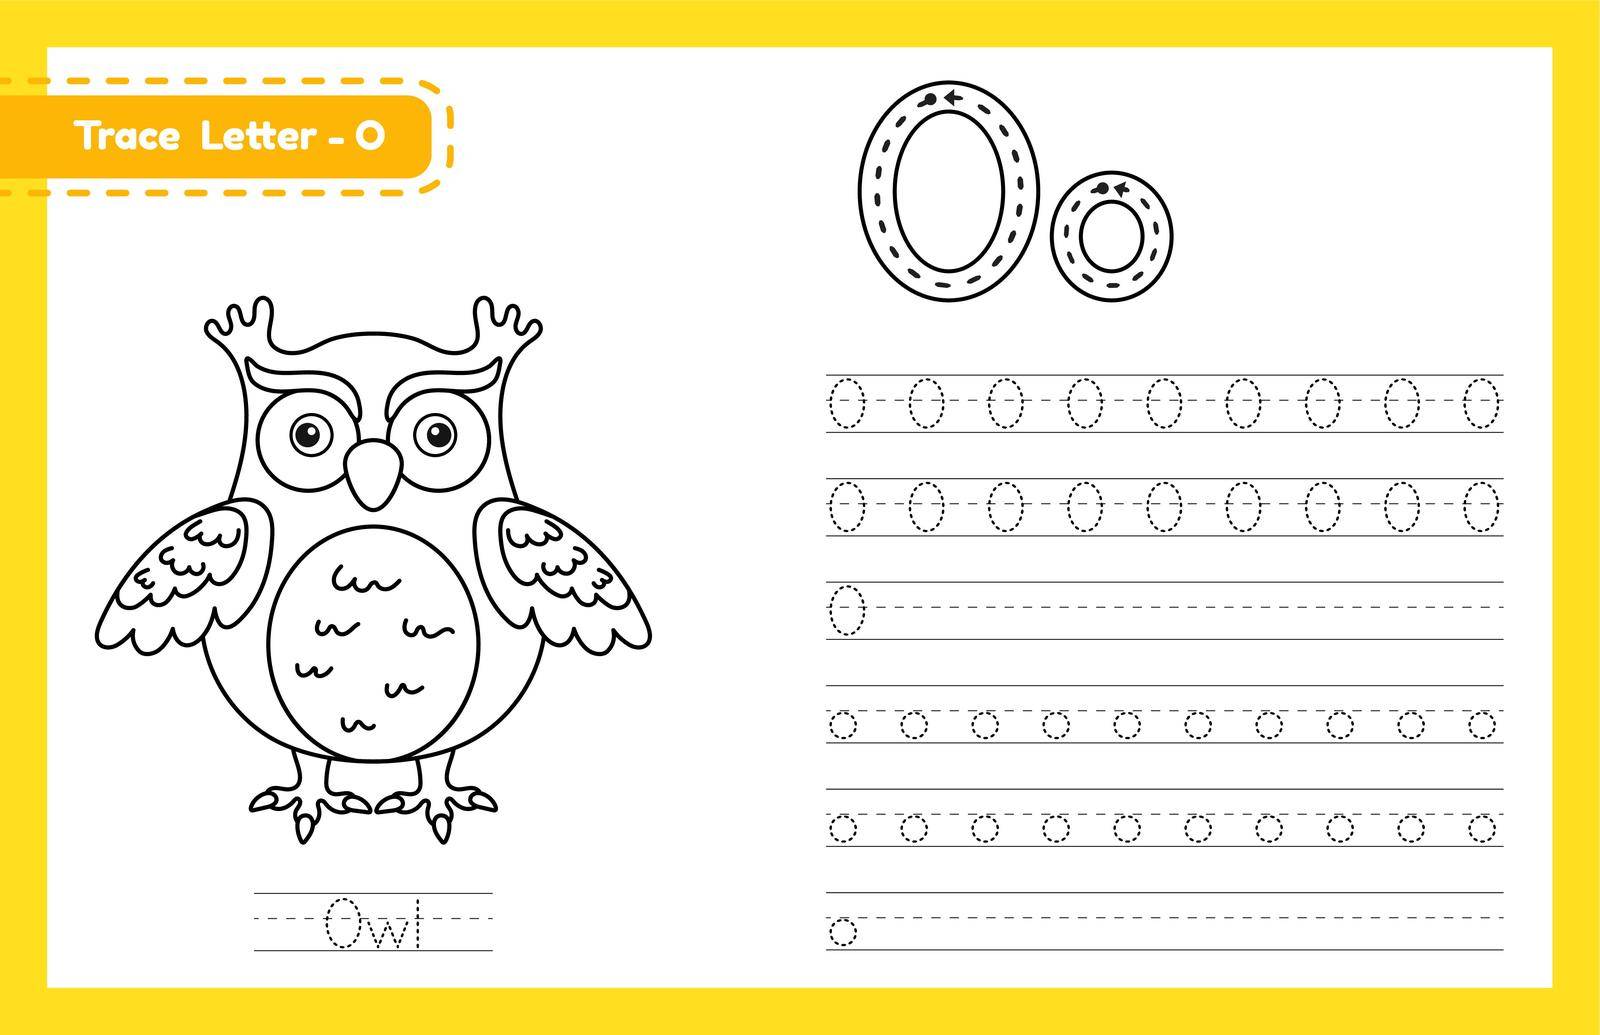 Trace letter O uppercase and lowercase. Alphabet tracing practice preschool worksheet for kids learning English with cute cartoon animal. Coloring book for Pre K, kindergarten. Vector illustration